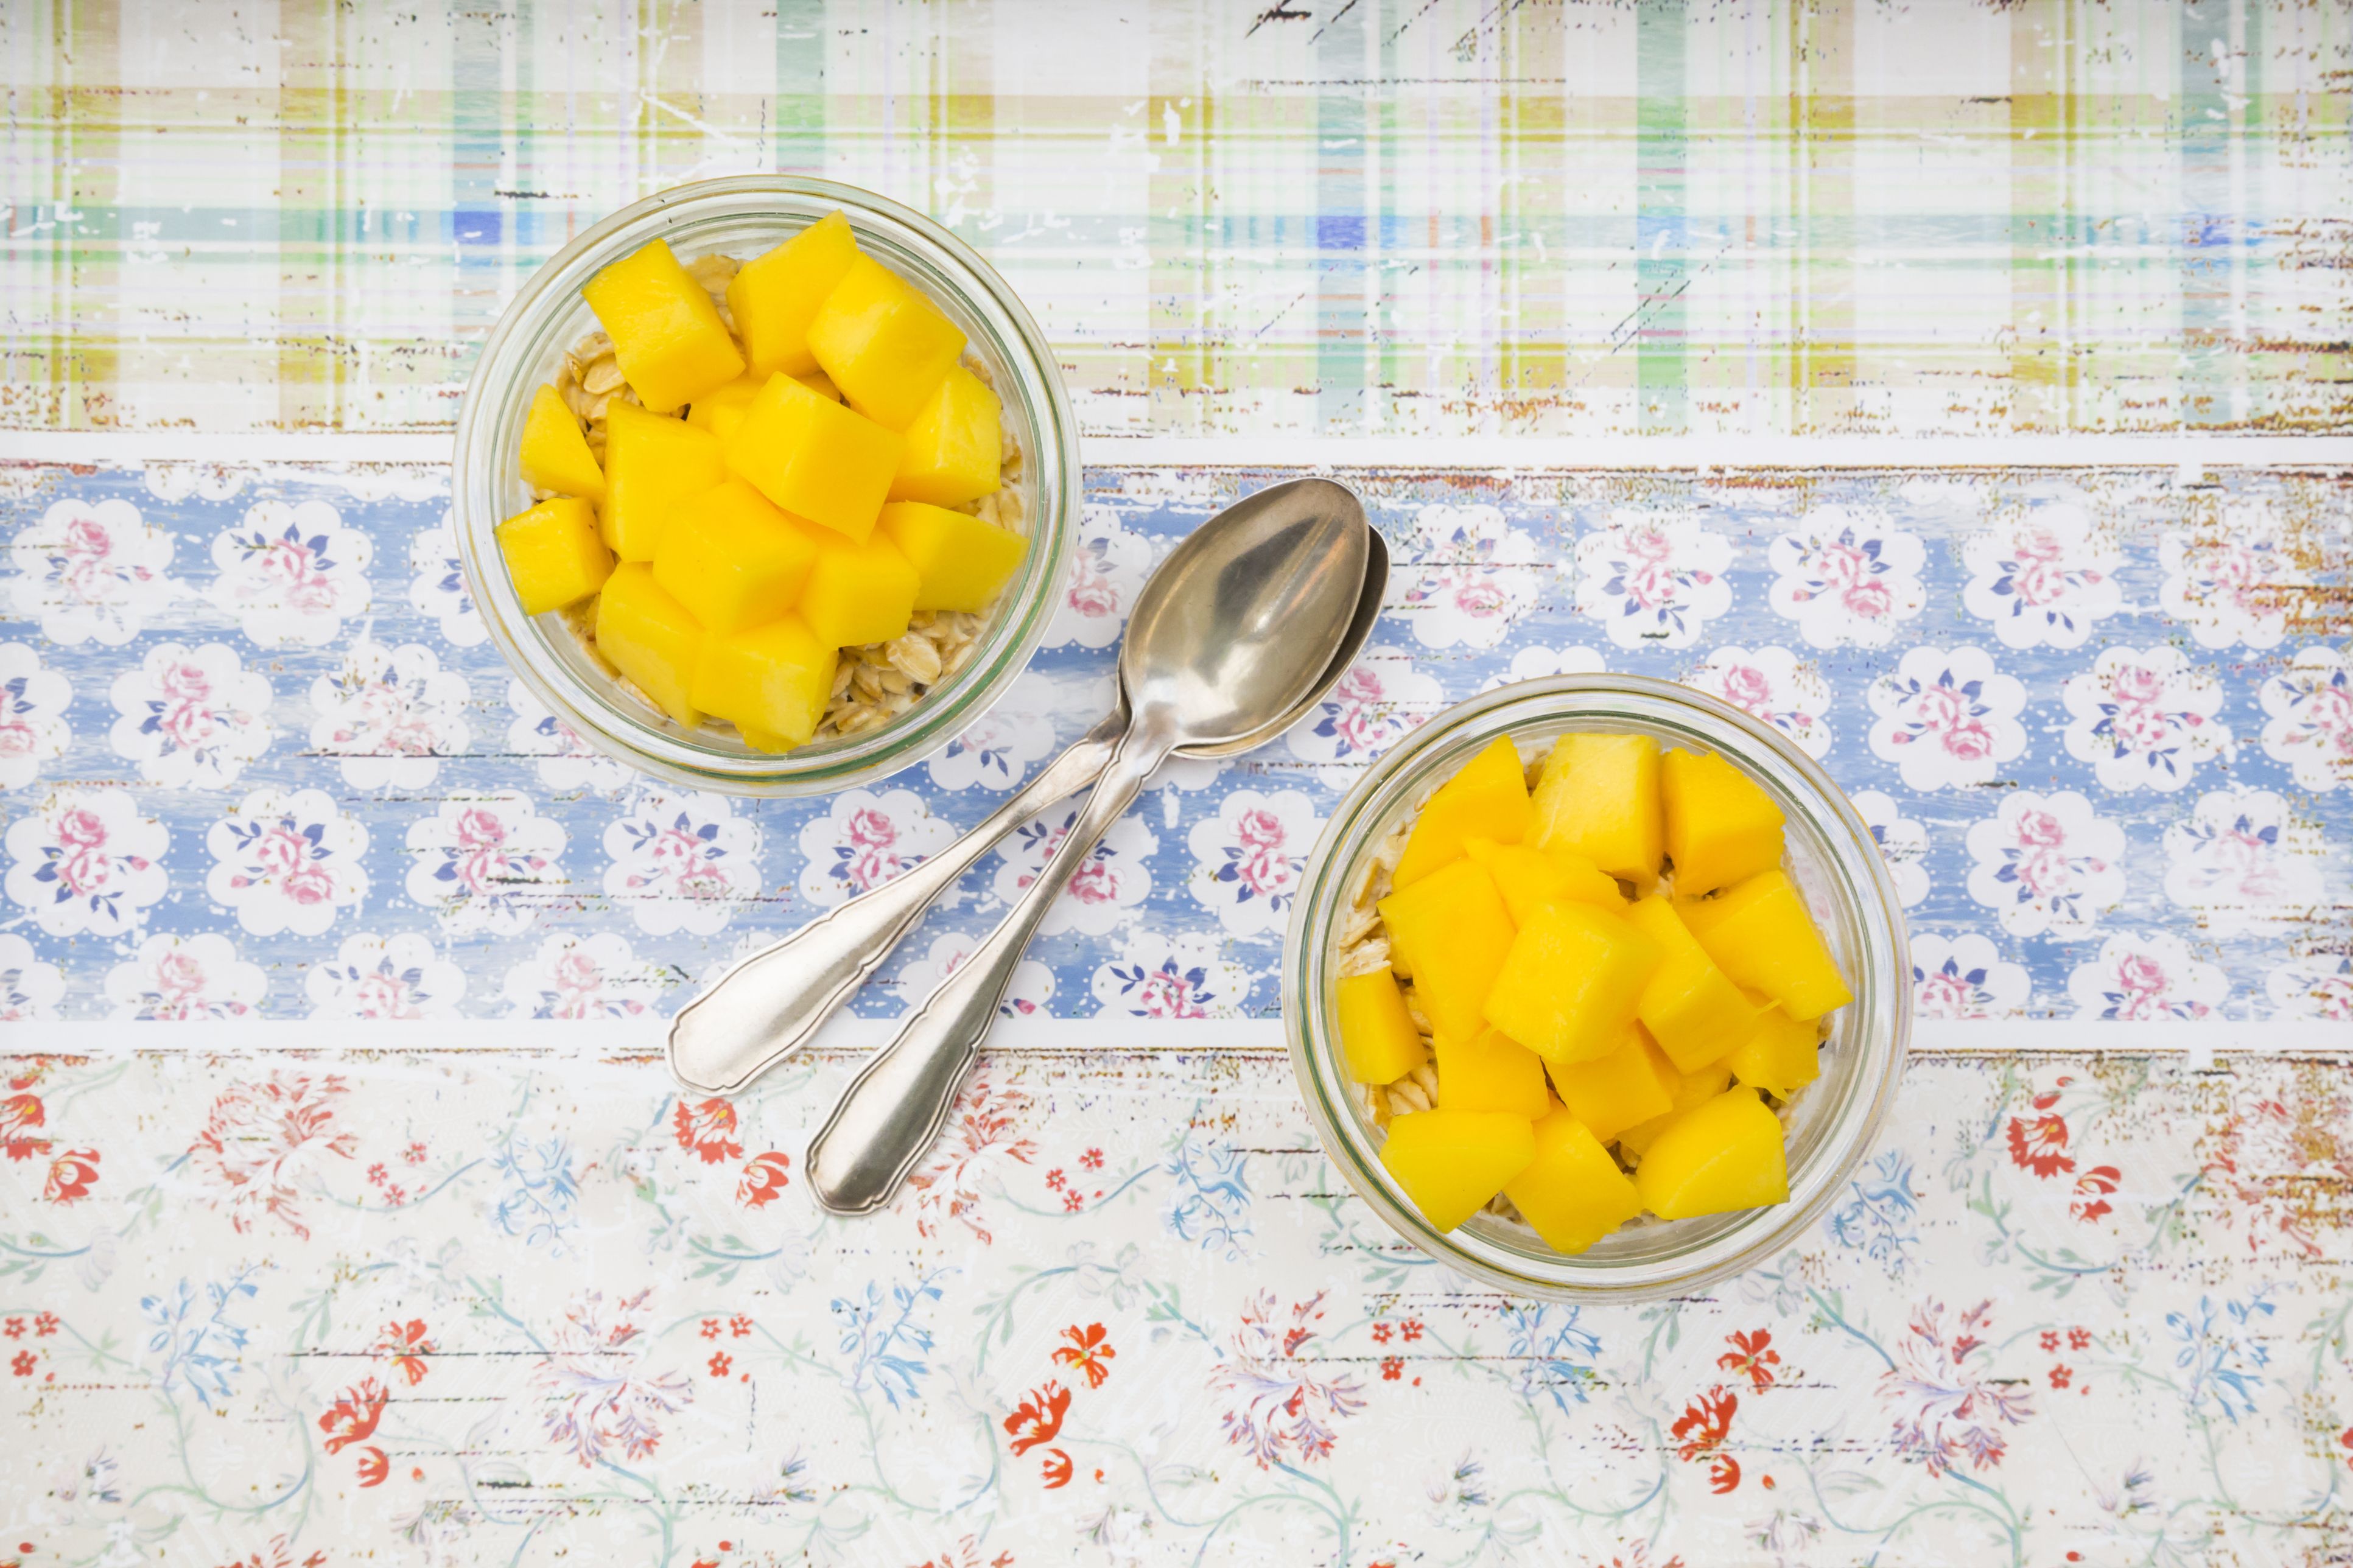 Two glasses of overnight oats with diced mango